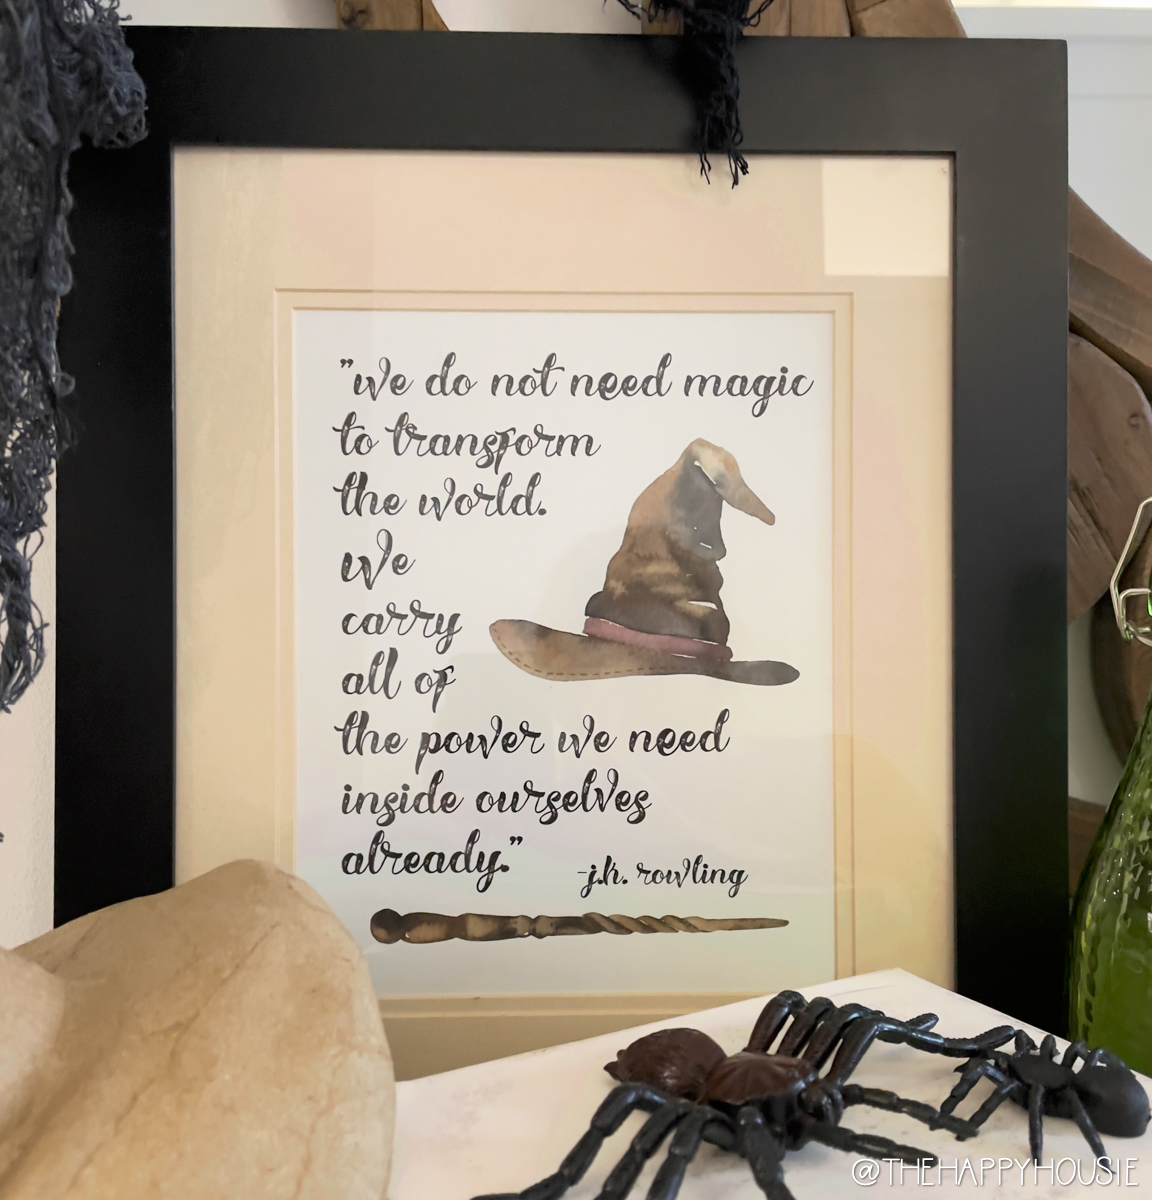 A Harry Potter printable quote that is framed.